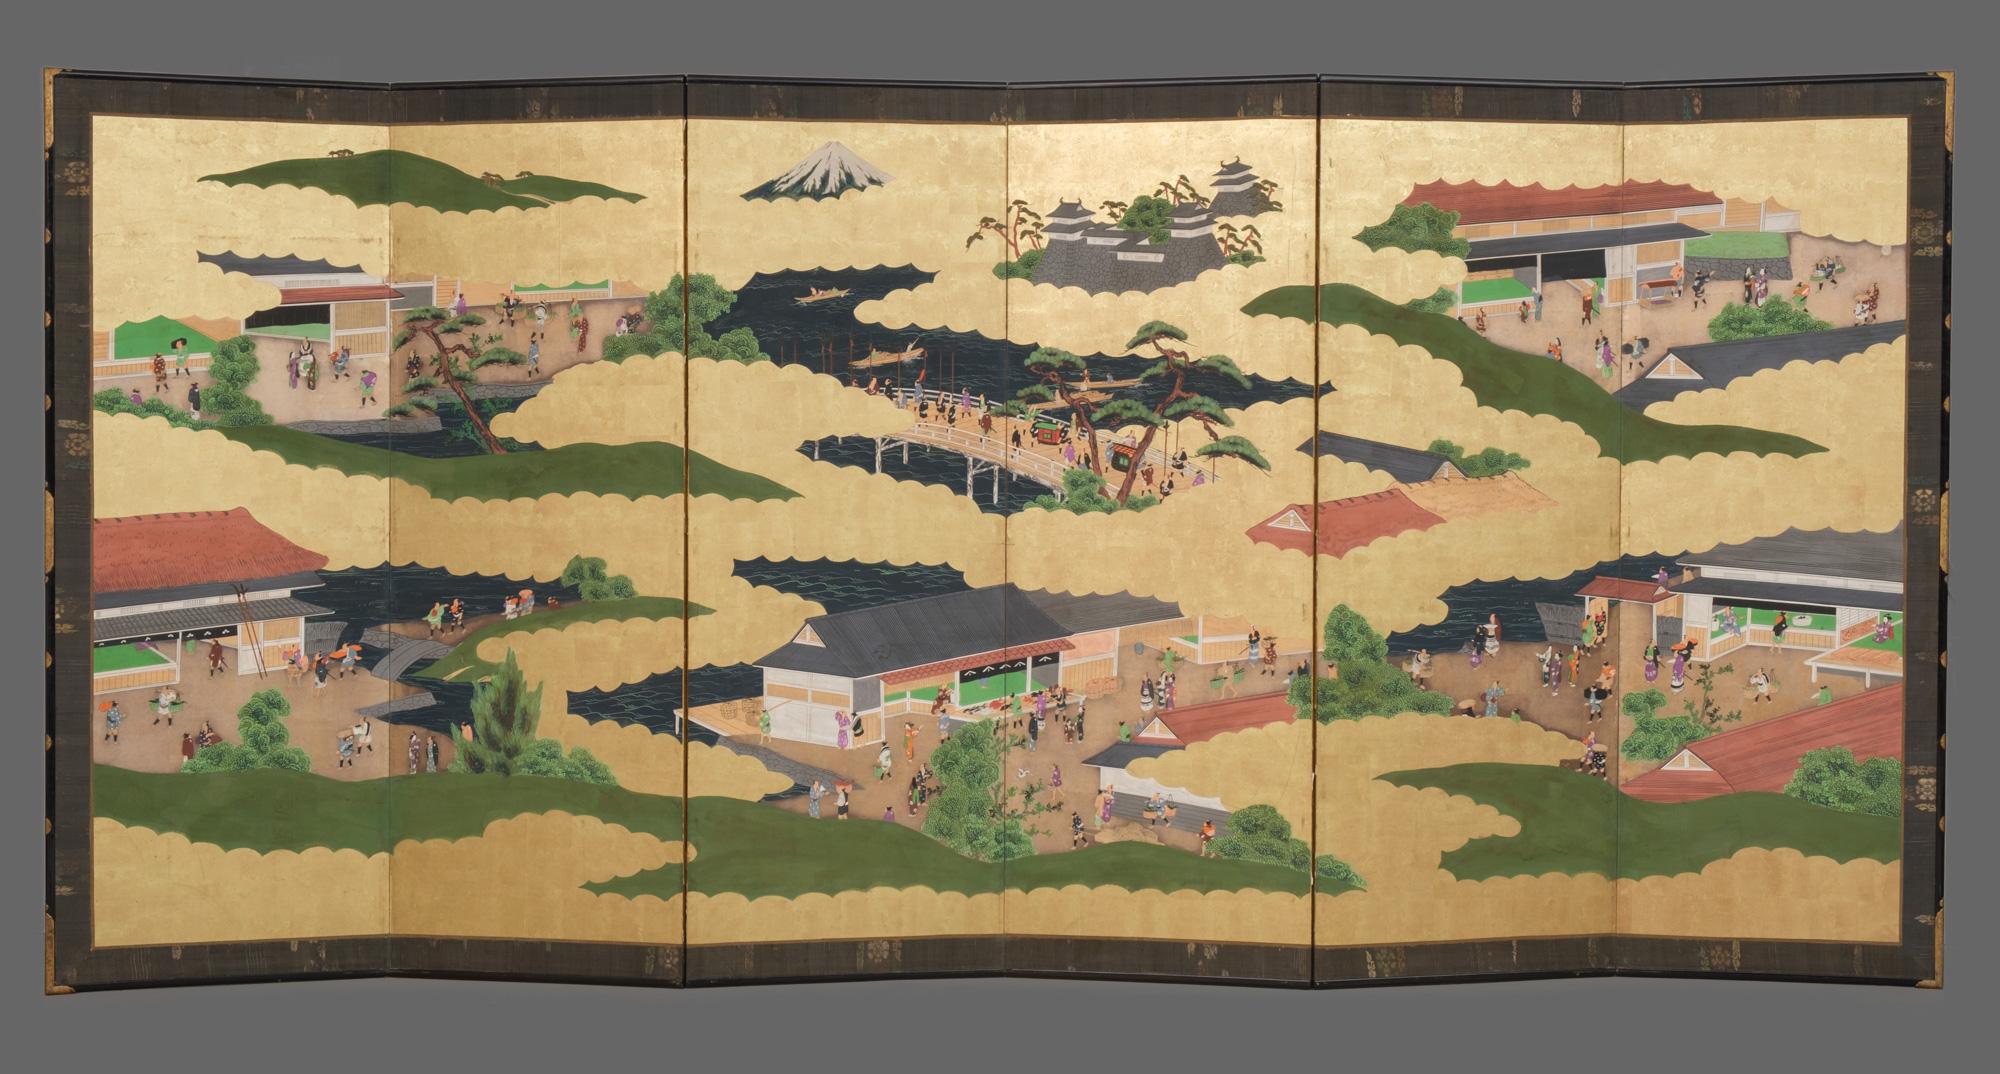 Remarkable and large six-panel byôbu (folding screen) with a detailed genre painting on gold leaf of different scenes of the town Yoshida, one of the Tôkaidô road stations. It shows various places and different aspects of daily life during the Edo